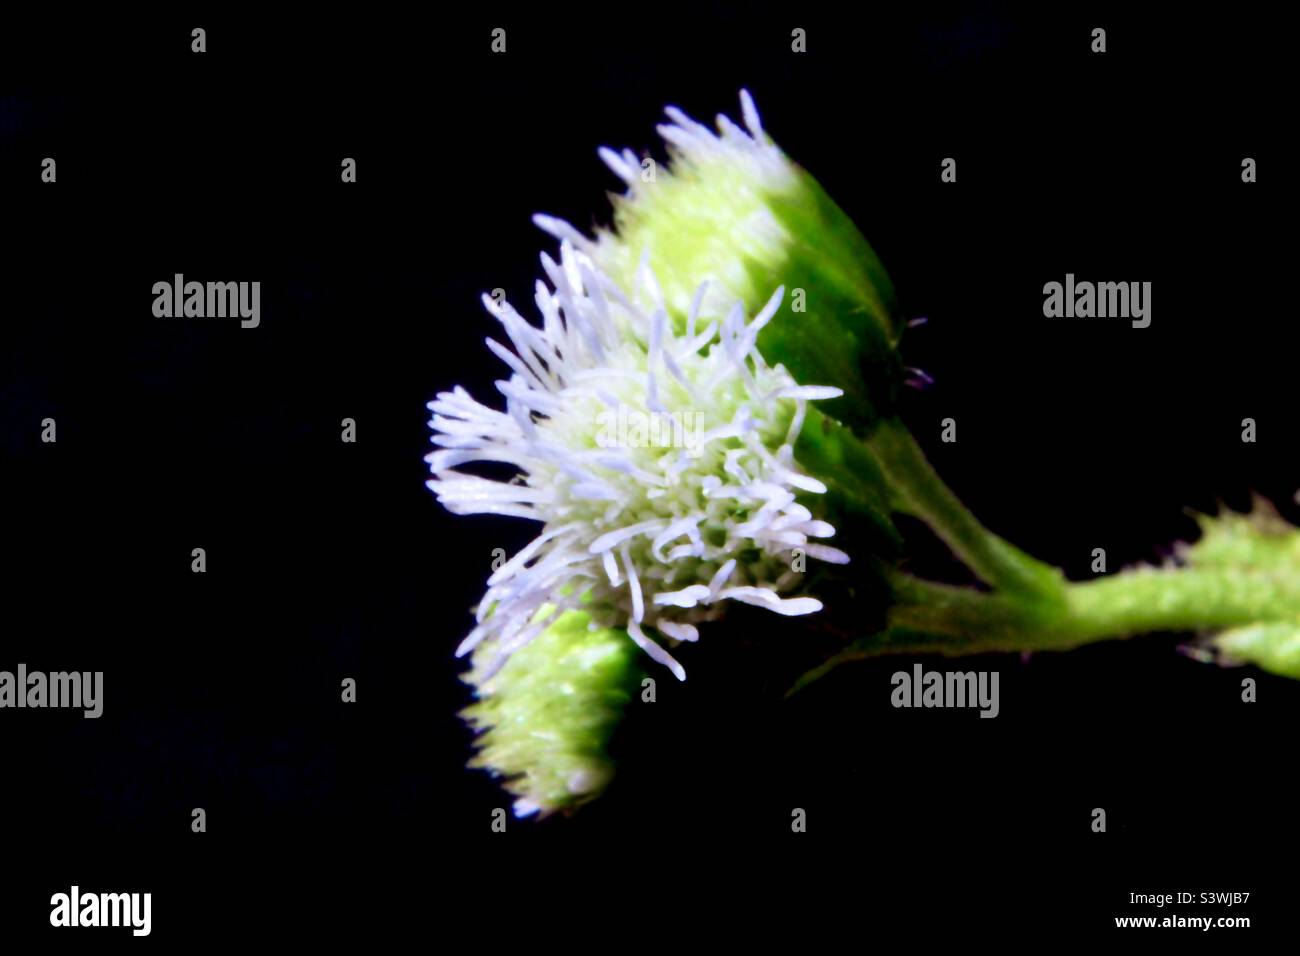 Flower of Ageratum Conyzoides Stock Photo